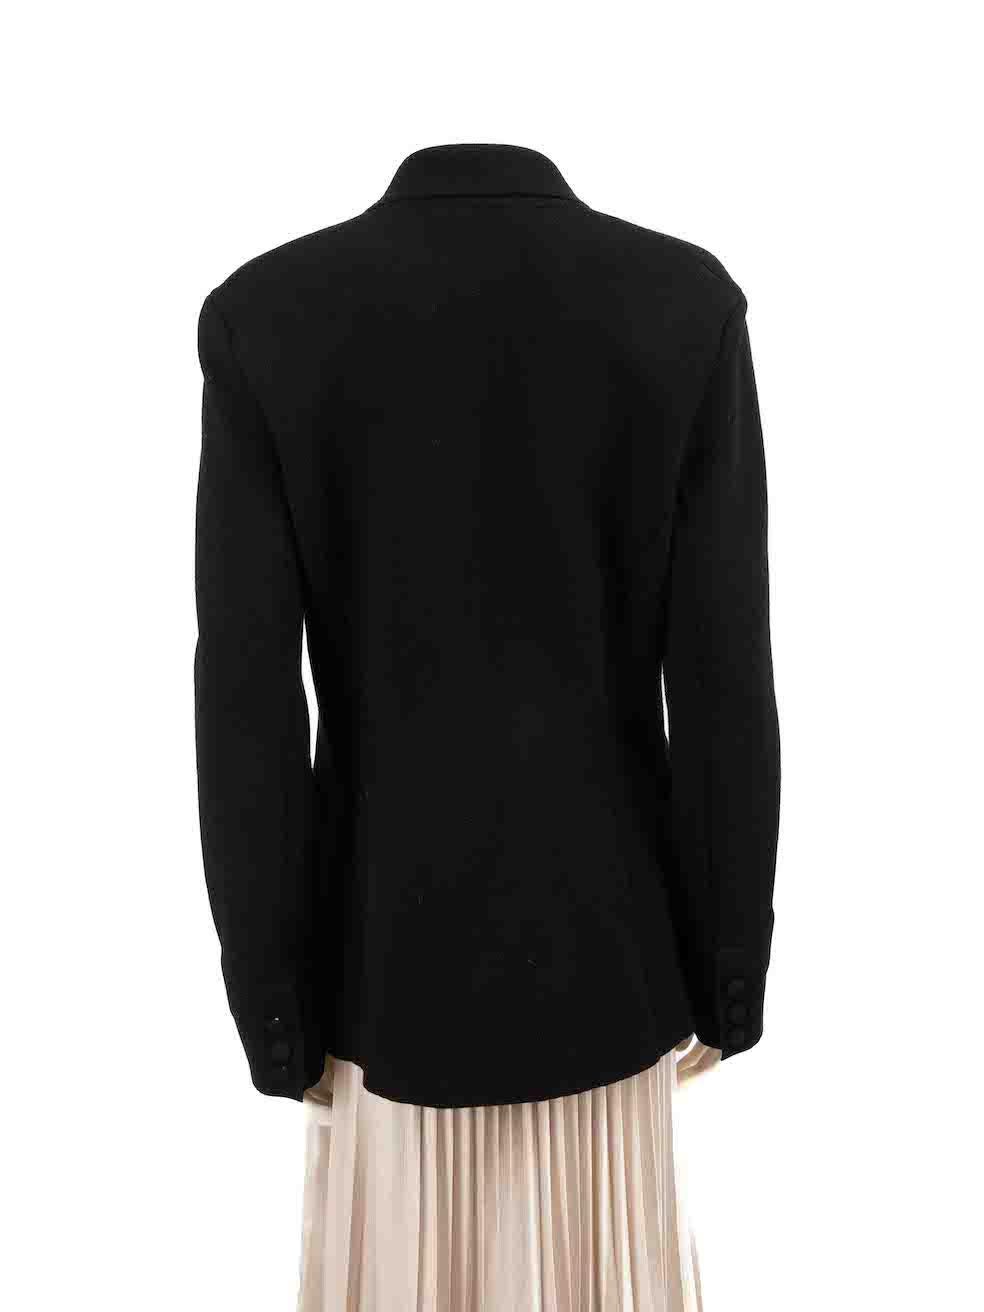 Altuzarra Black Double Breasted Knit Blazer Size M In Good Condition For Sale In London, GB